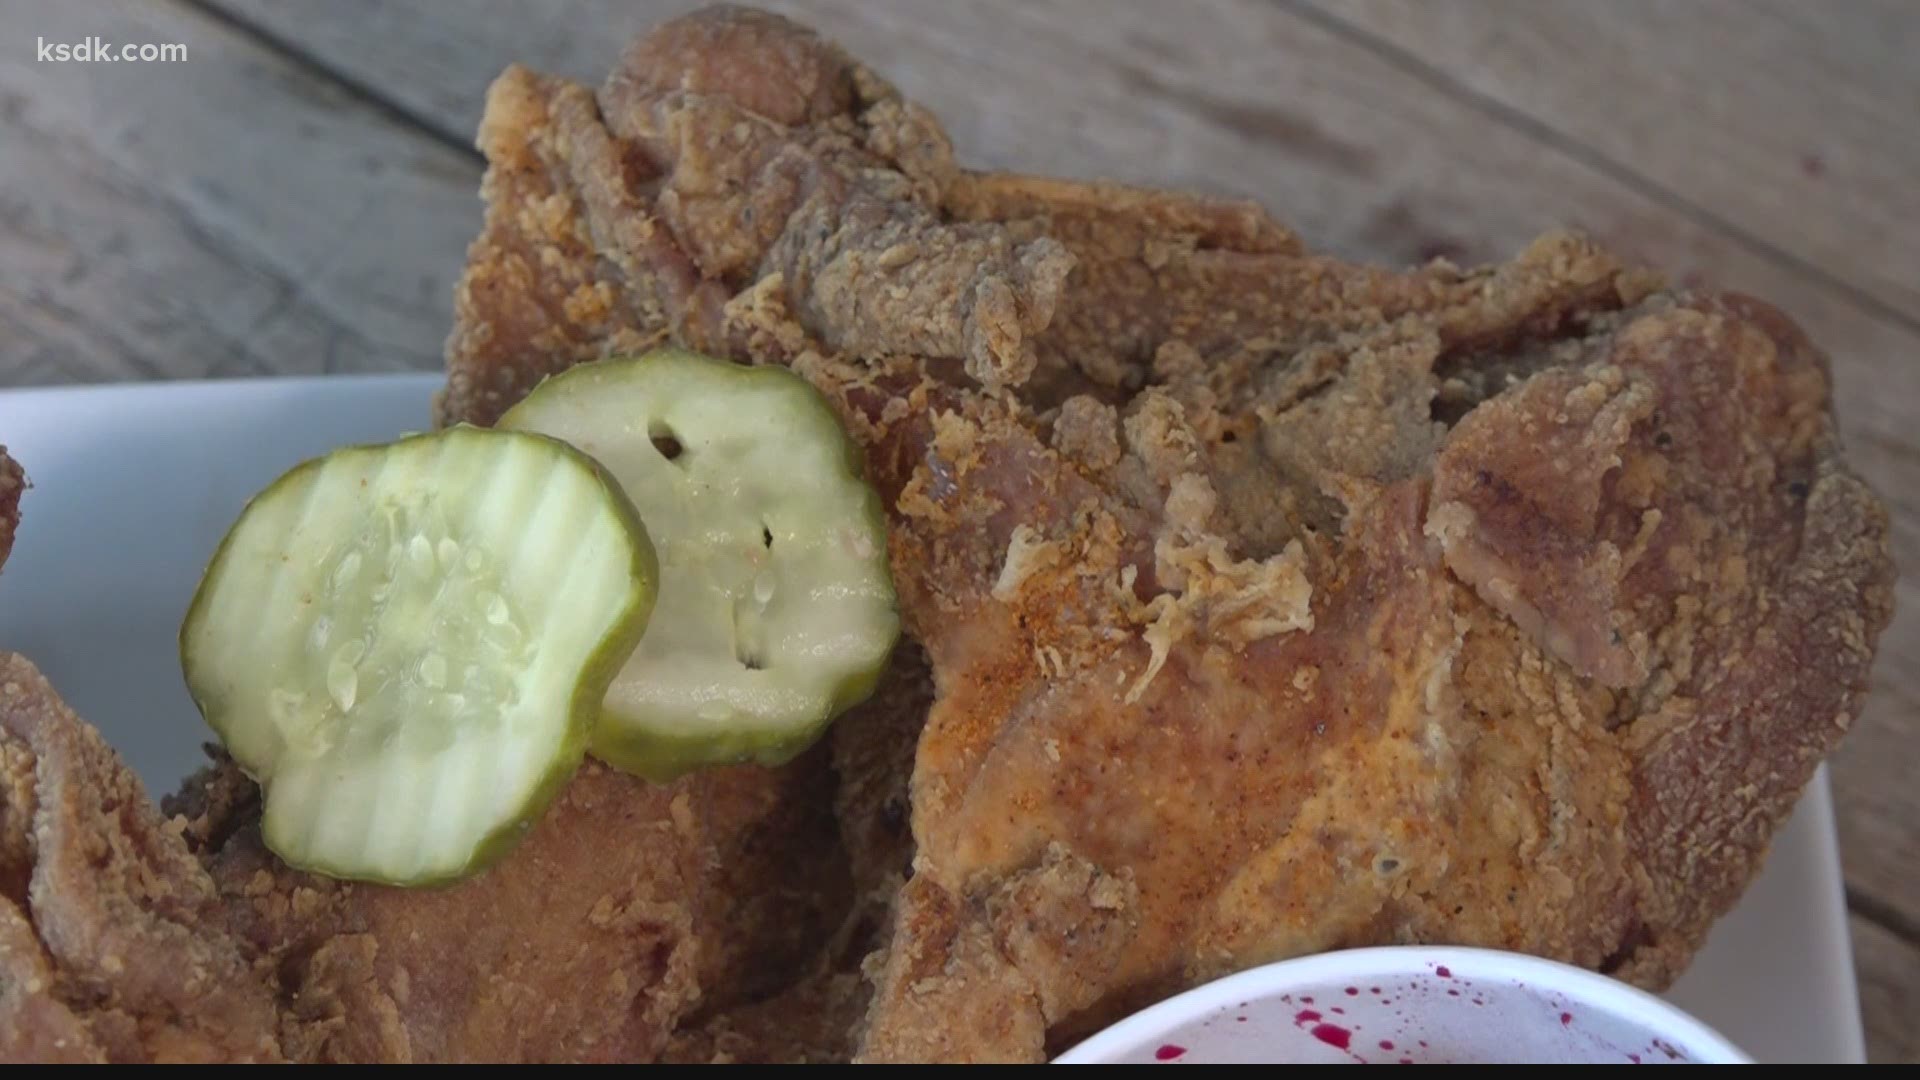 Learn To Make The Best Fried Chicken In Missouri At This Virtual Cooking Class Ksdk Com